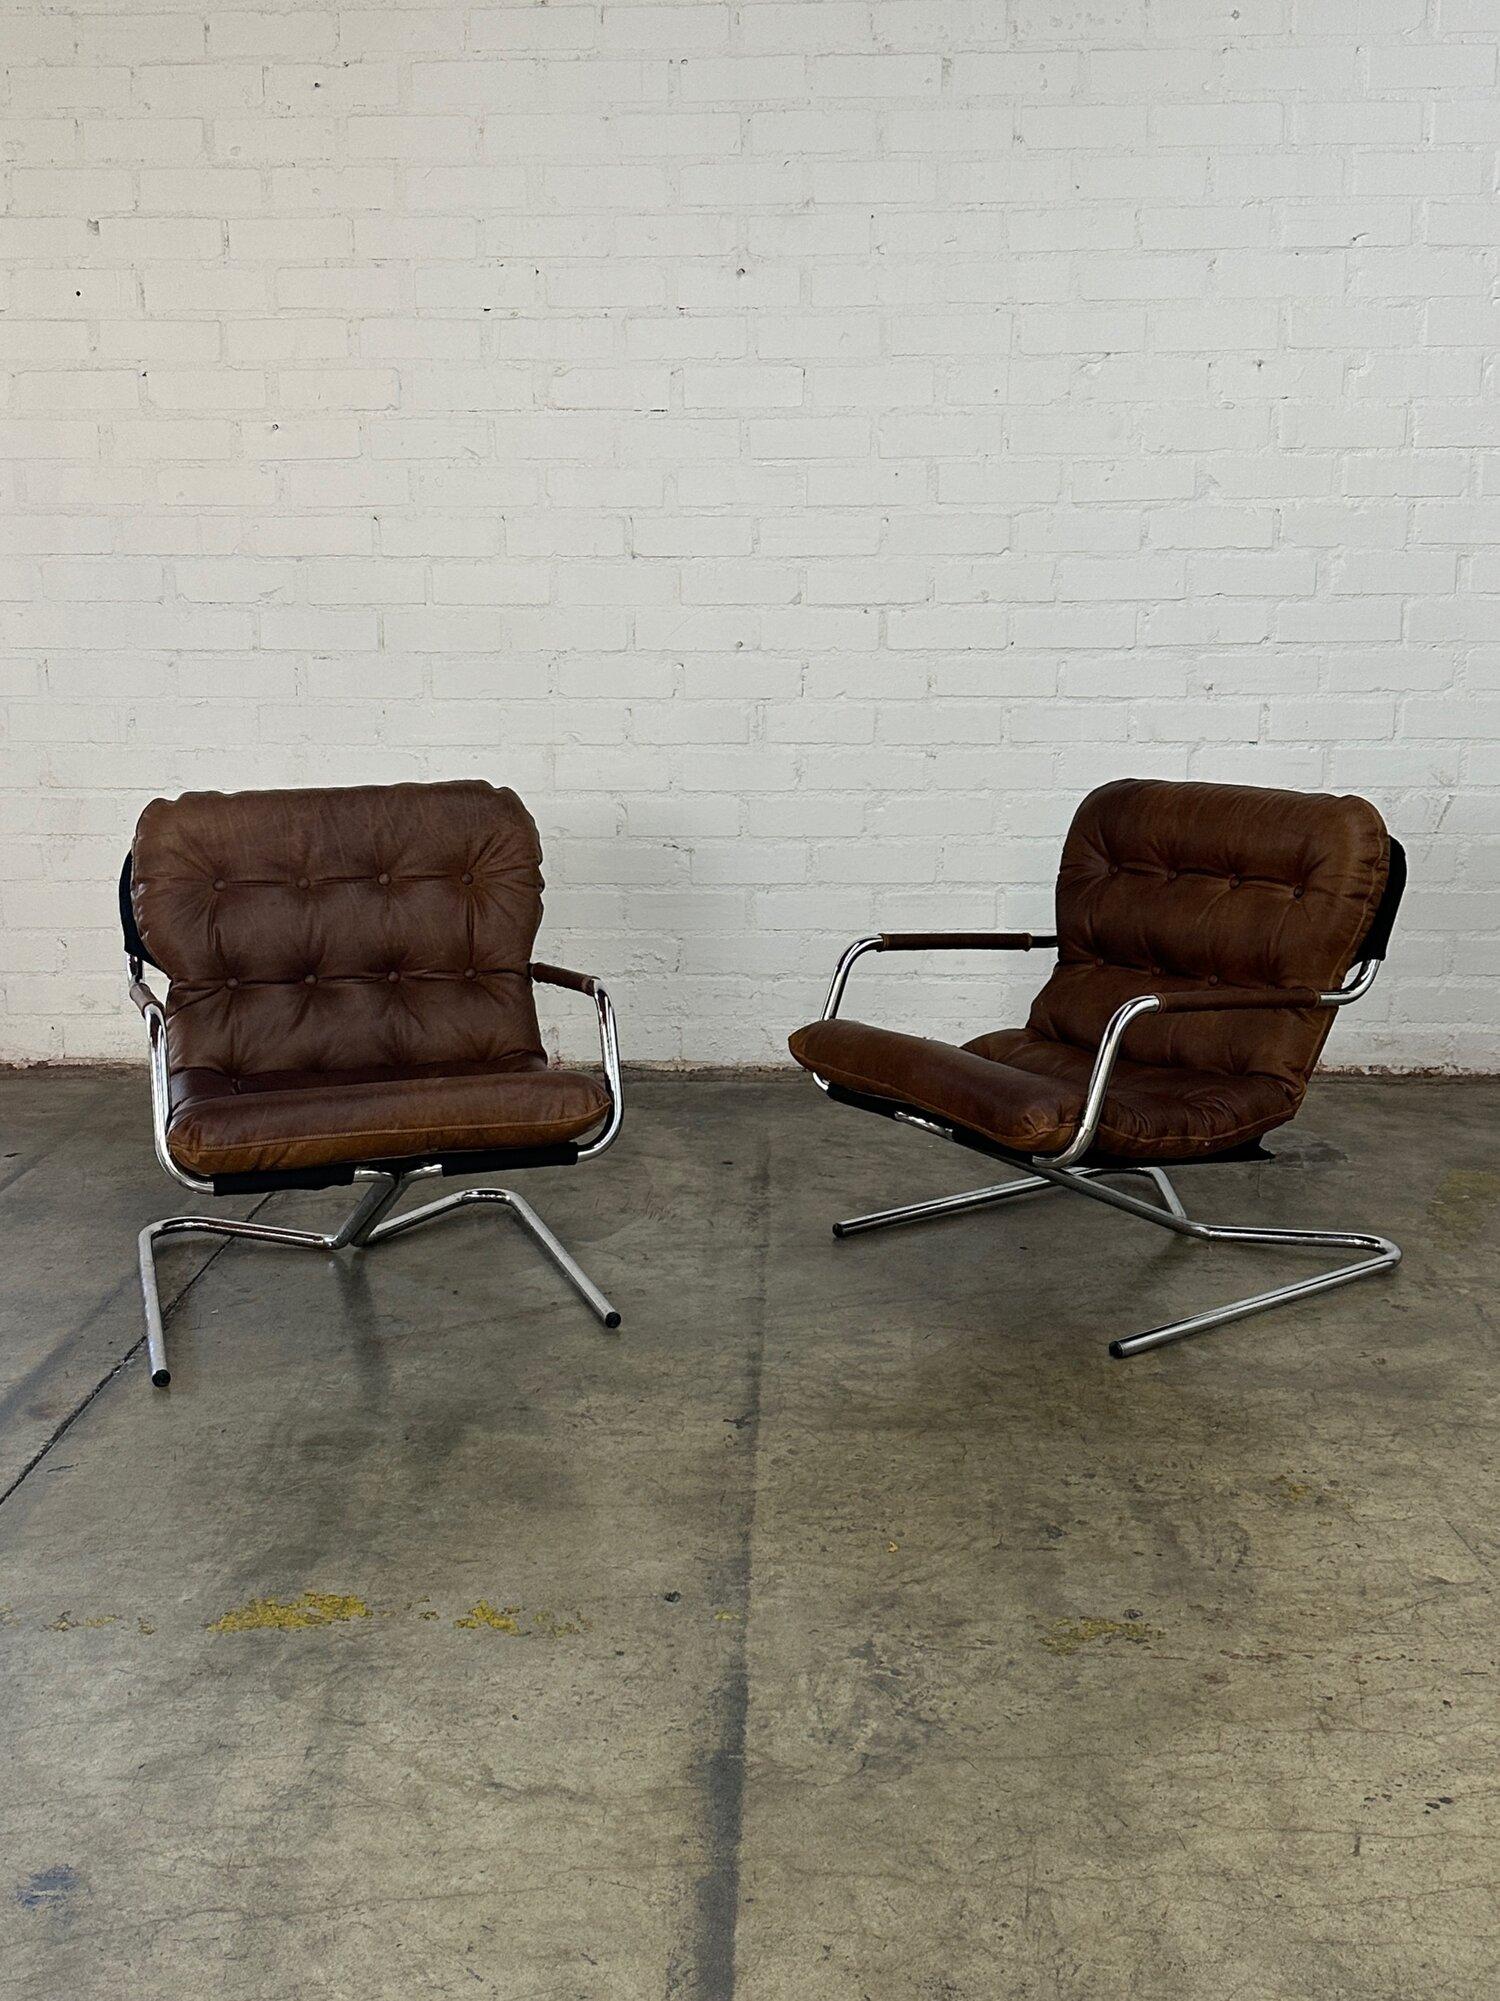 Cantilevered Italian Lounge chairs - sold separately 8